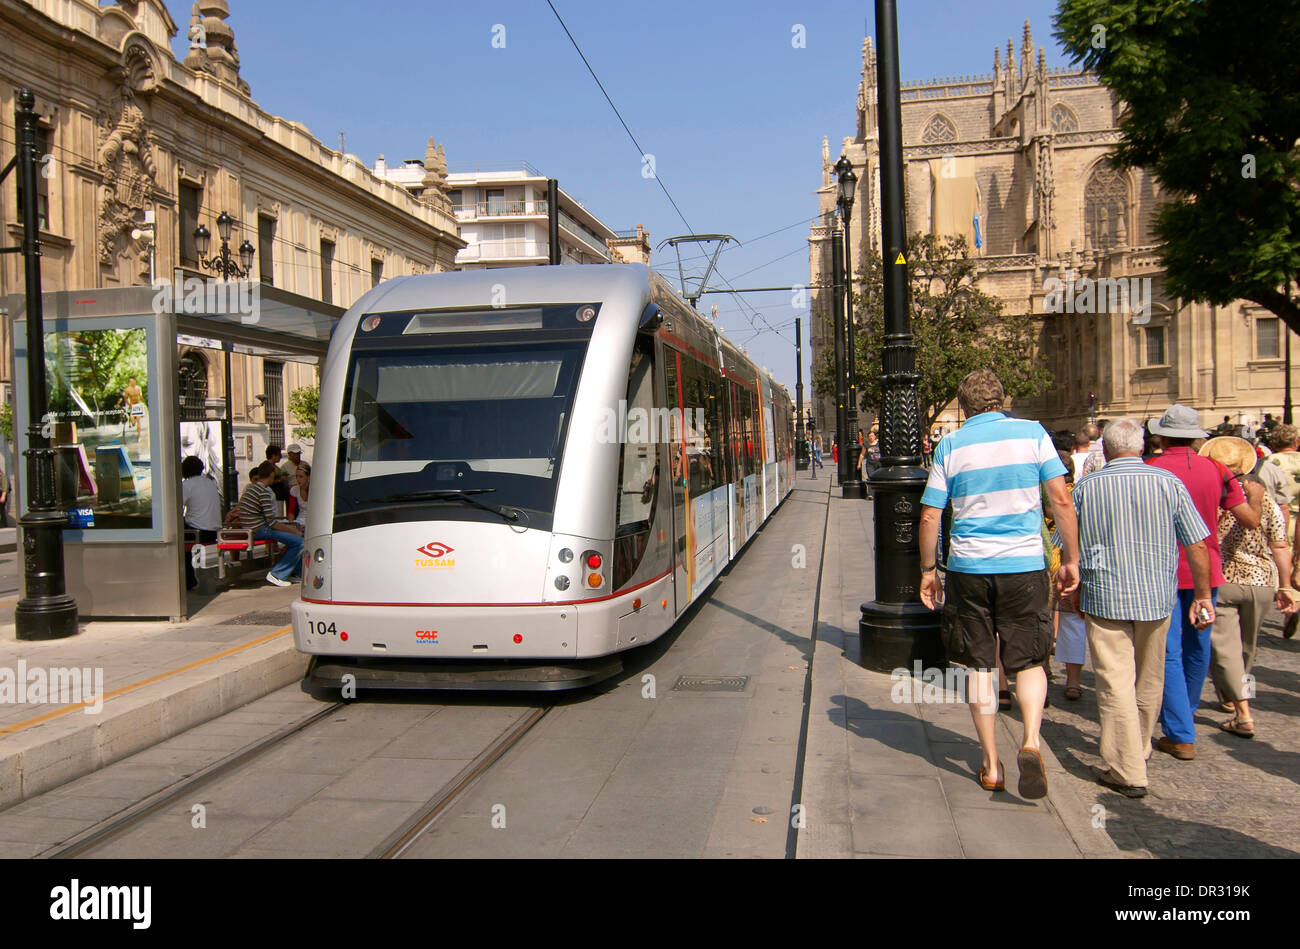 Metrocentro tram, Seville, Region of Andalusia, Spain, Europe Stock Photo